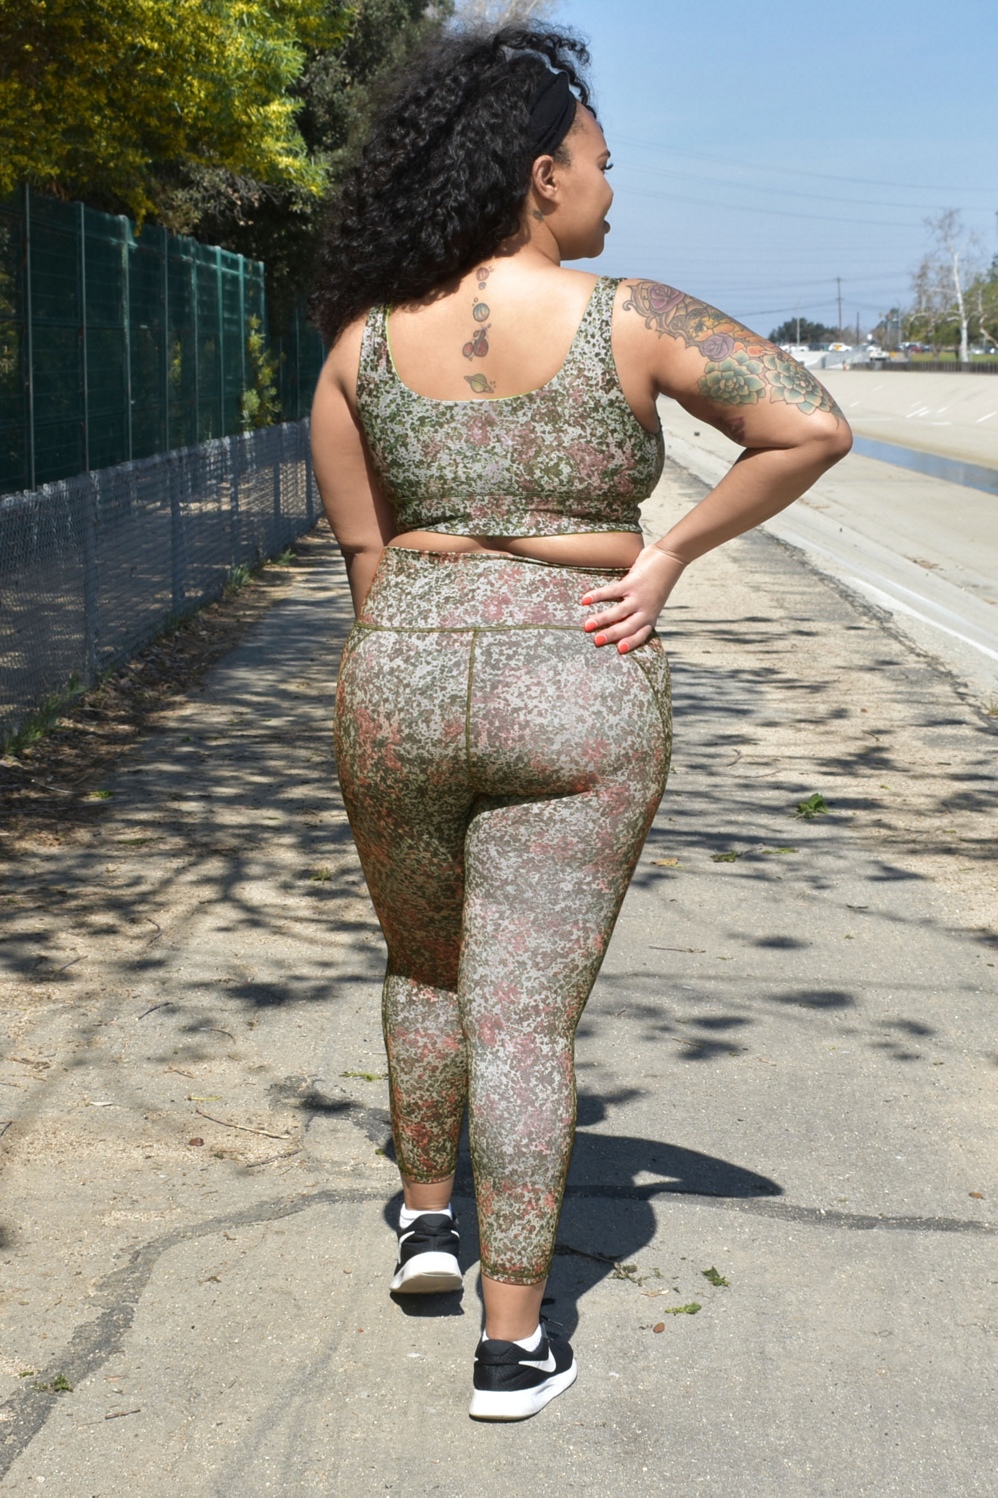 Massively fat ass in spandex on the streets